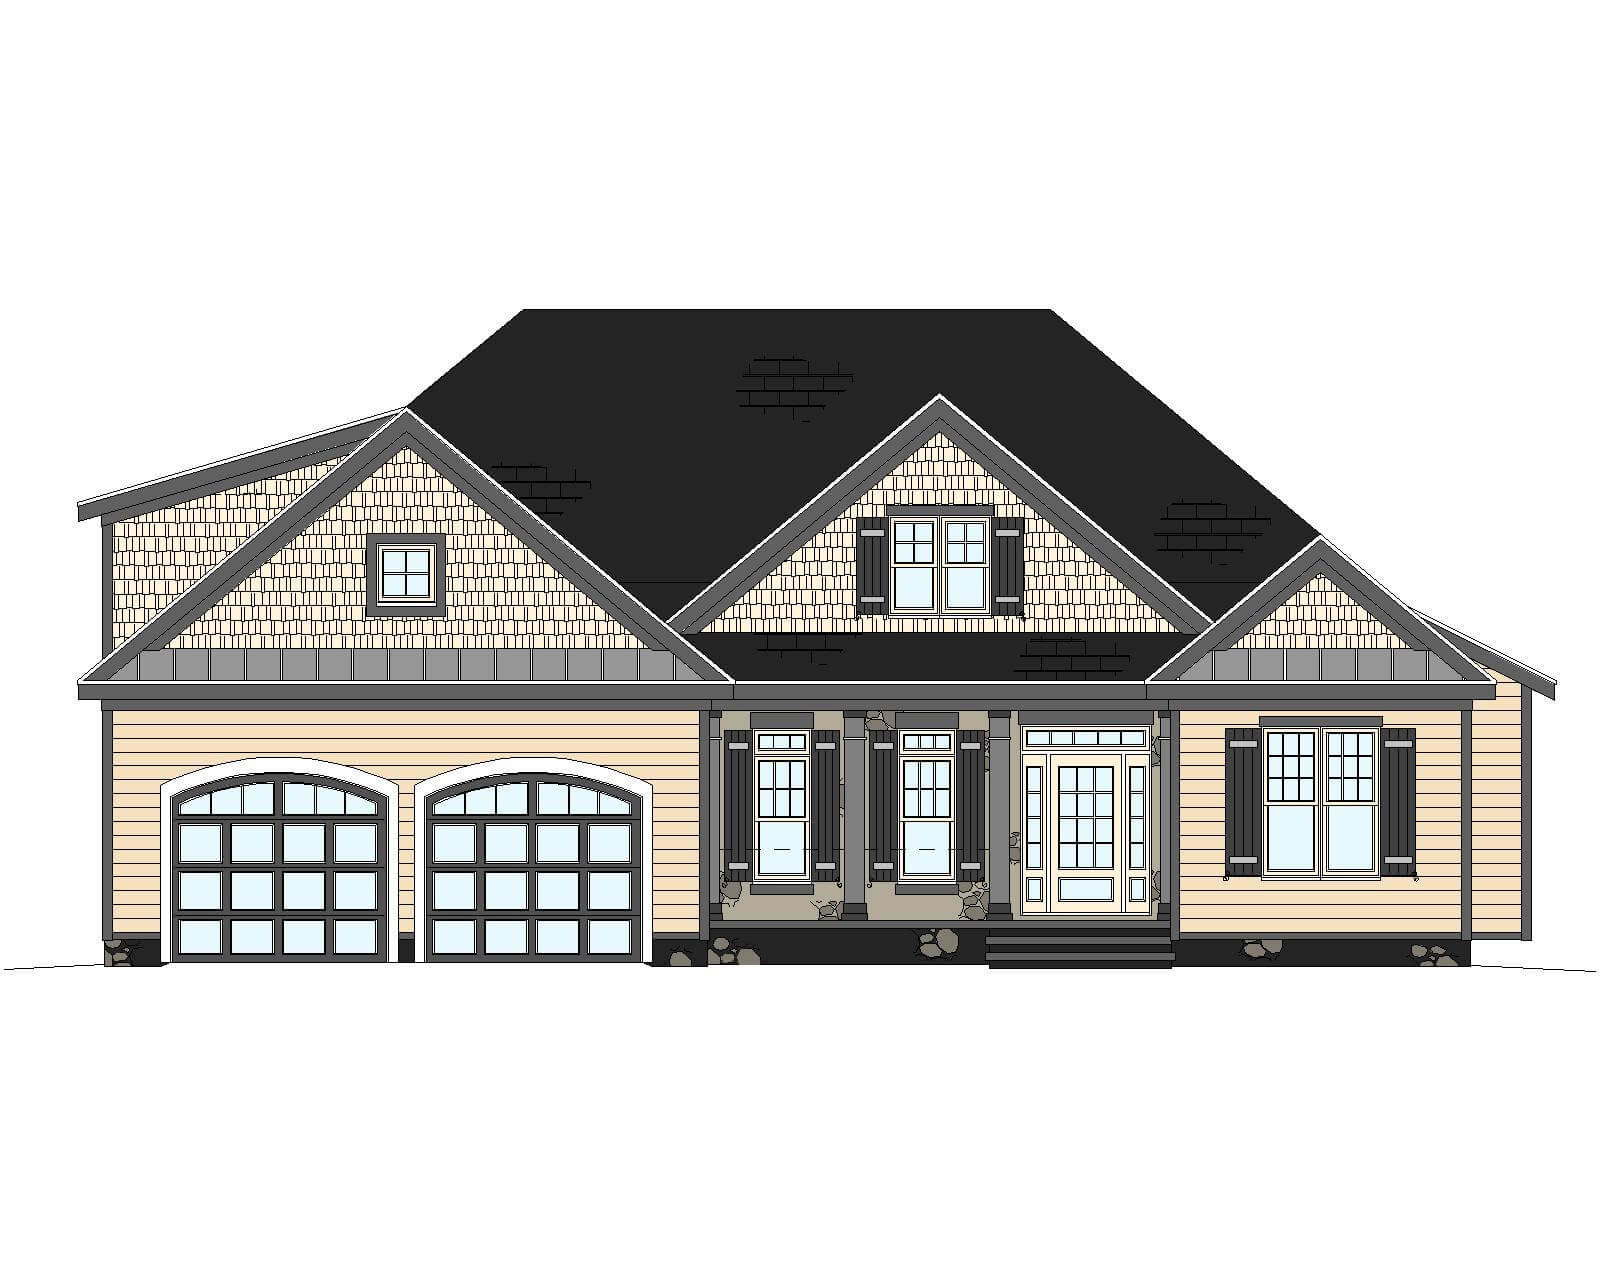 Illustration of a modern single-story house featuring a symmetrical plan with a central gable over the entrance, flanked by two large windows, and a double garage on the left. The facade includes 13-1336.